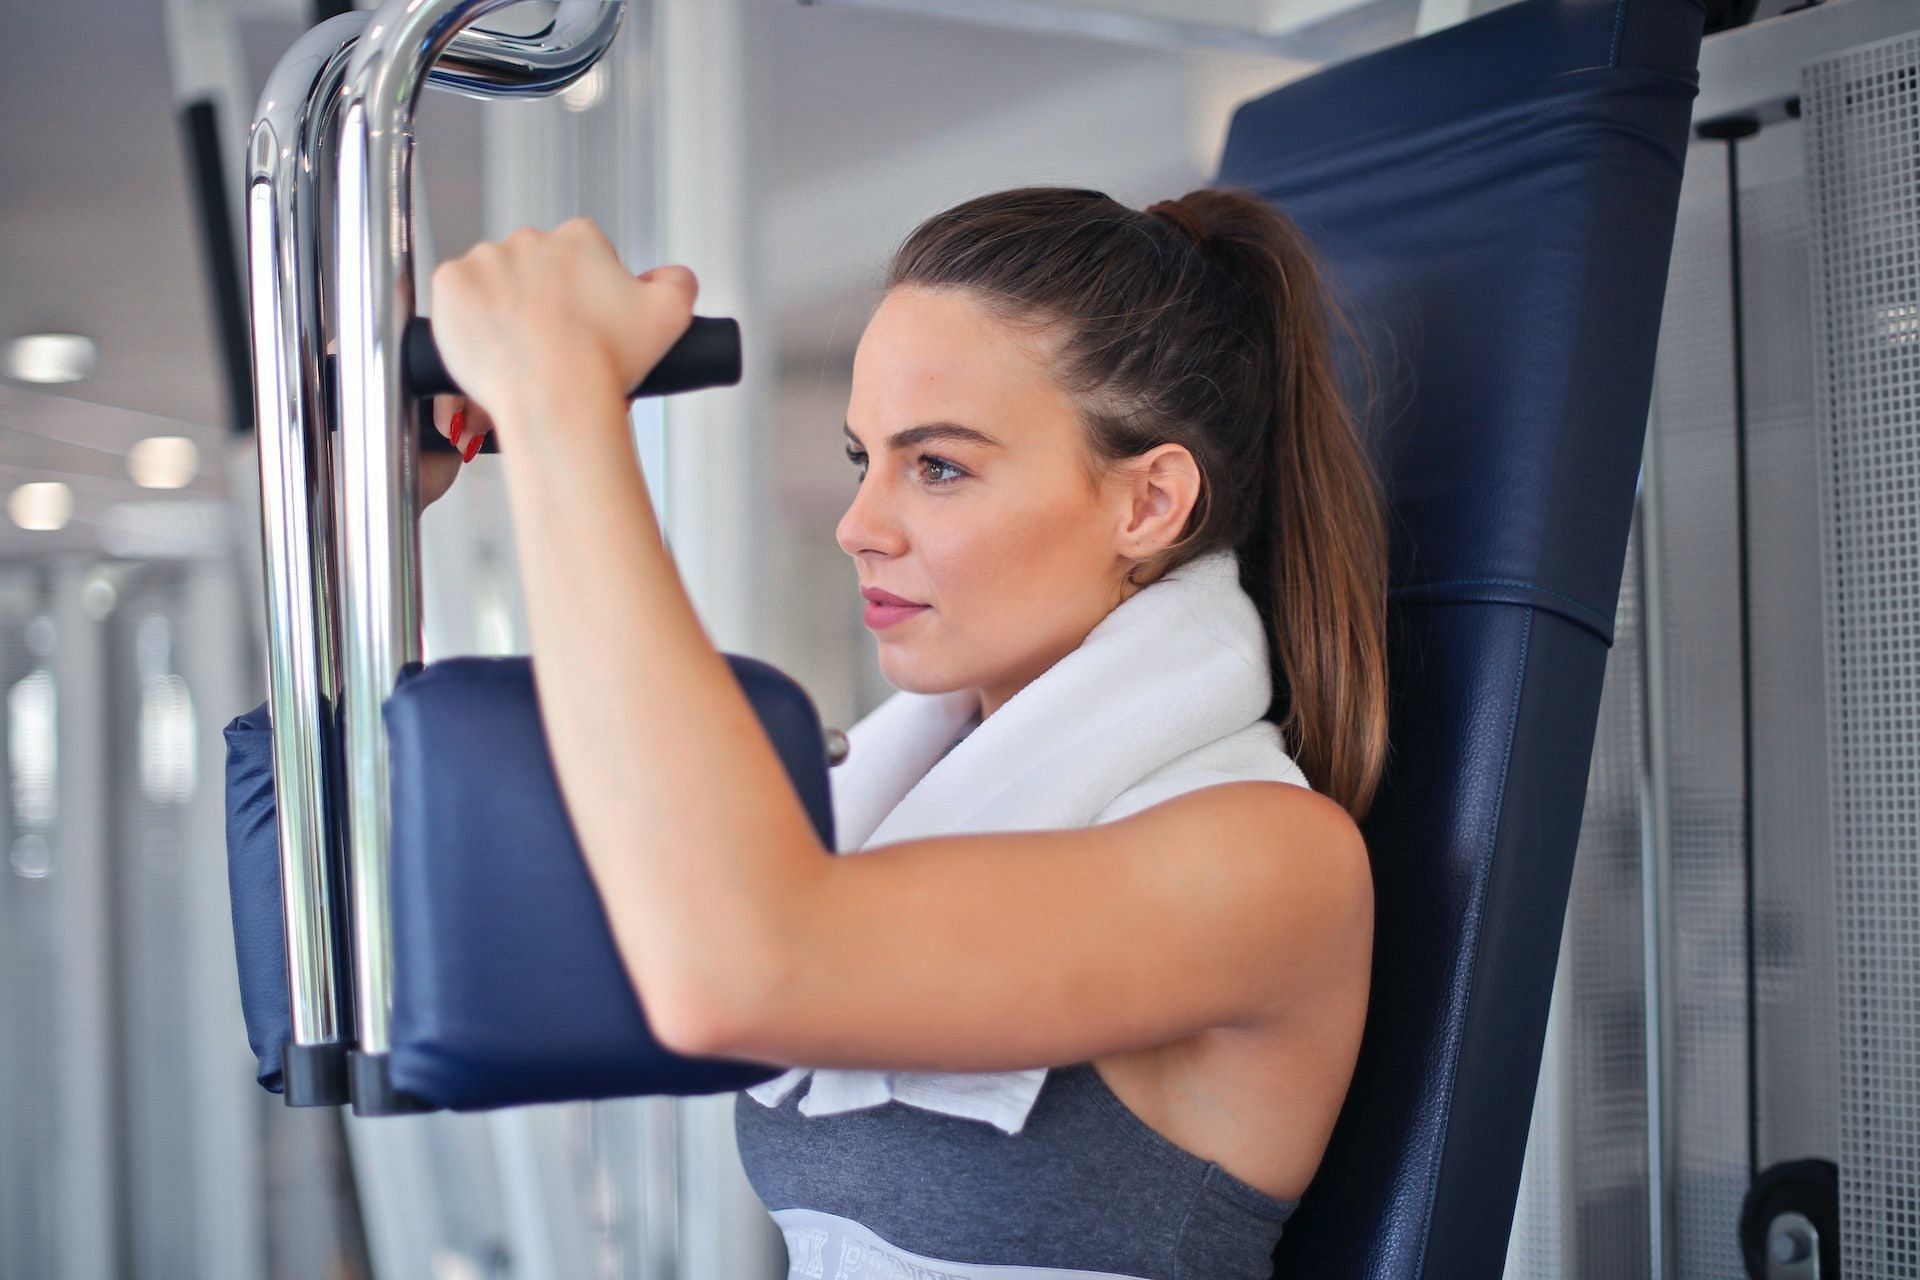 Resistance training can strengthen your entire body. (Photo via Pexels/Andrea Piacquadio)